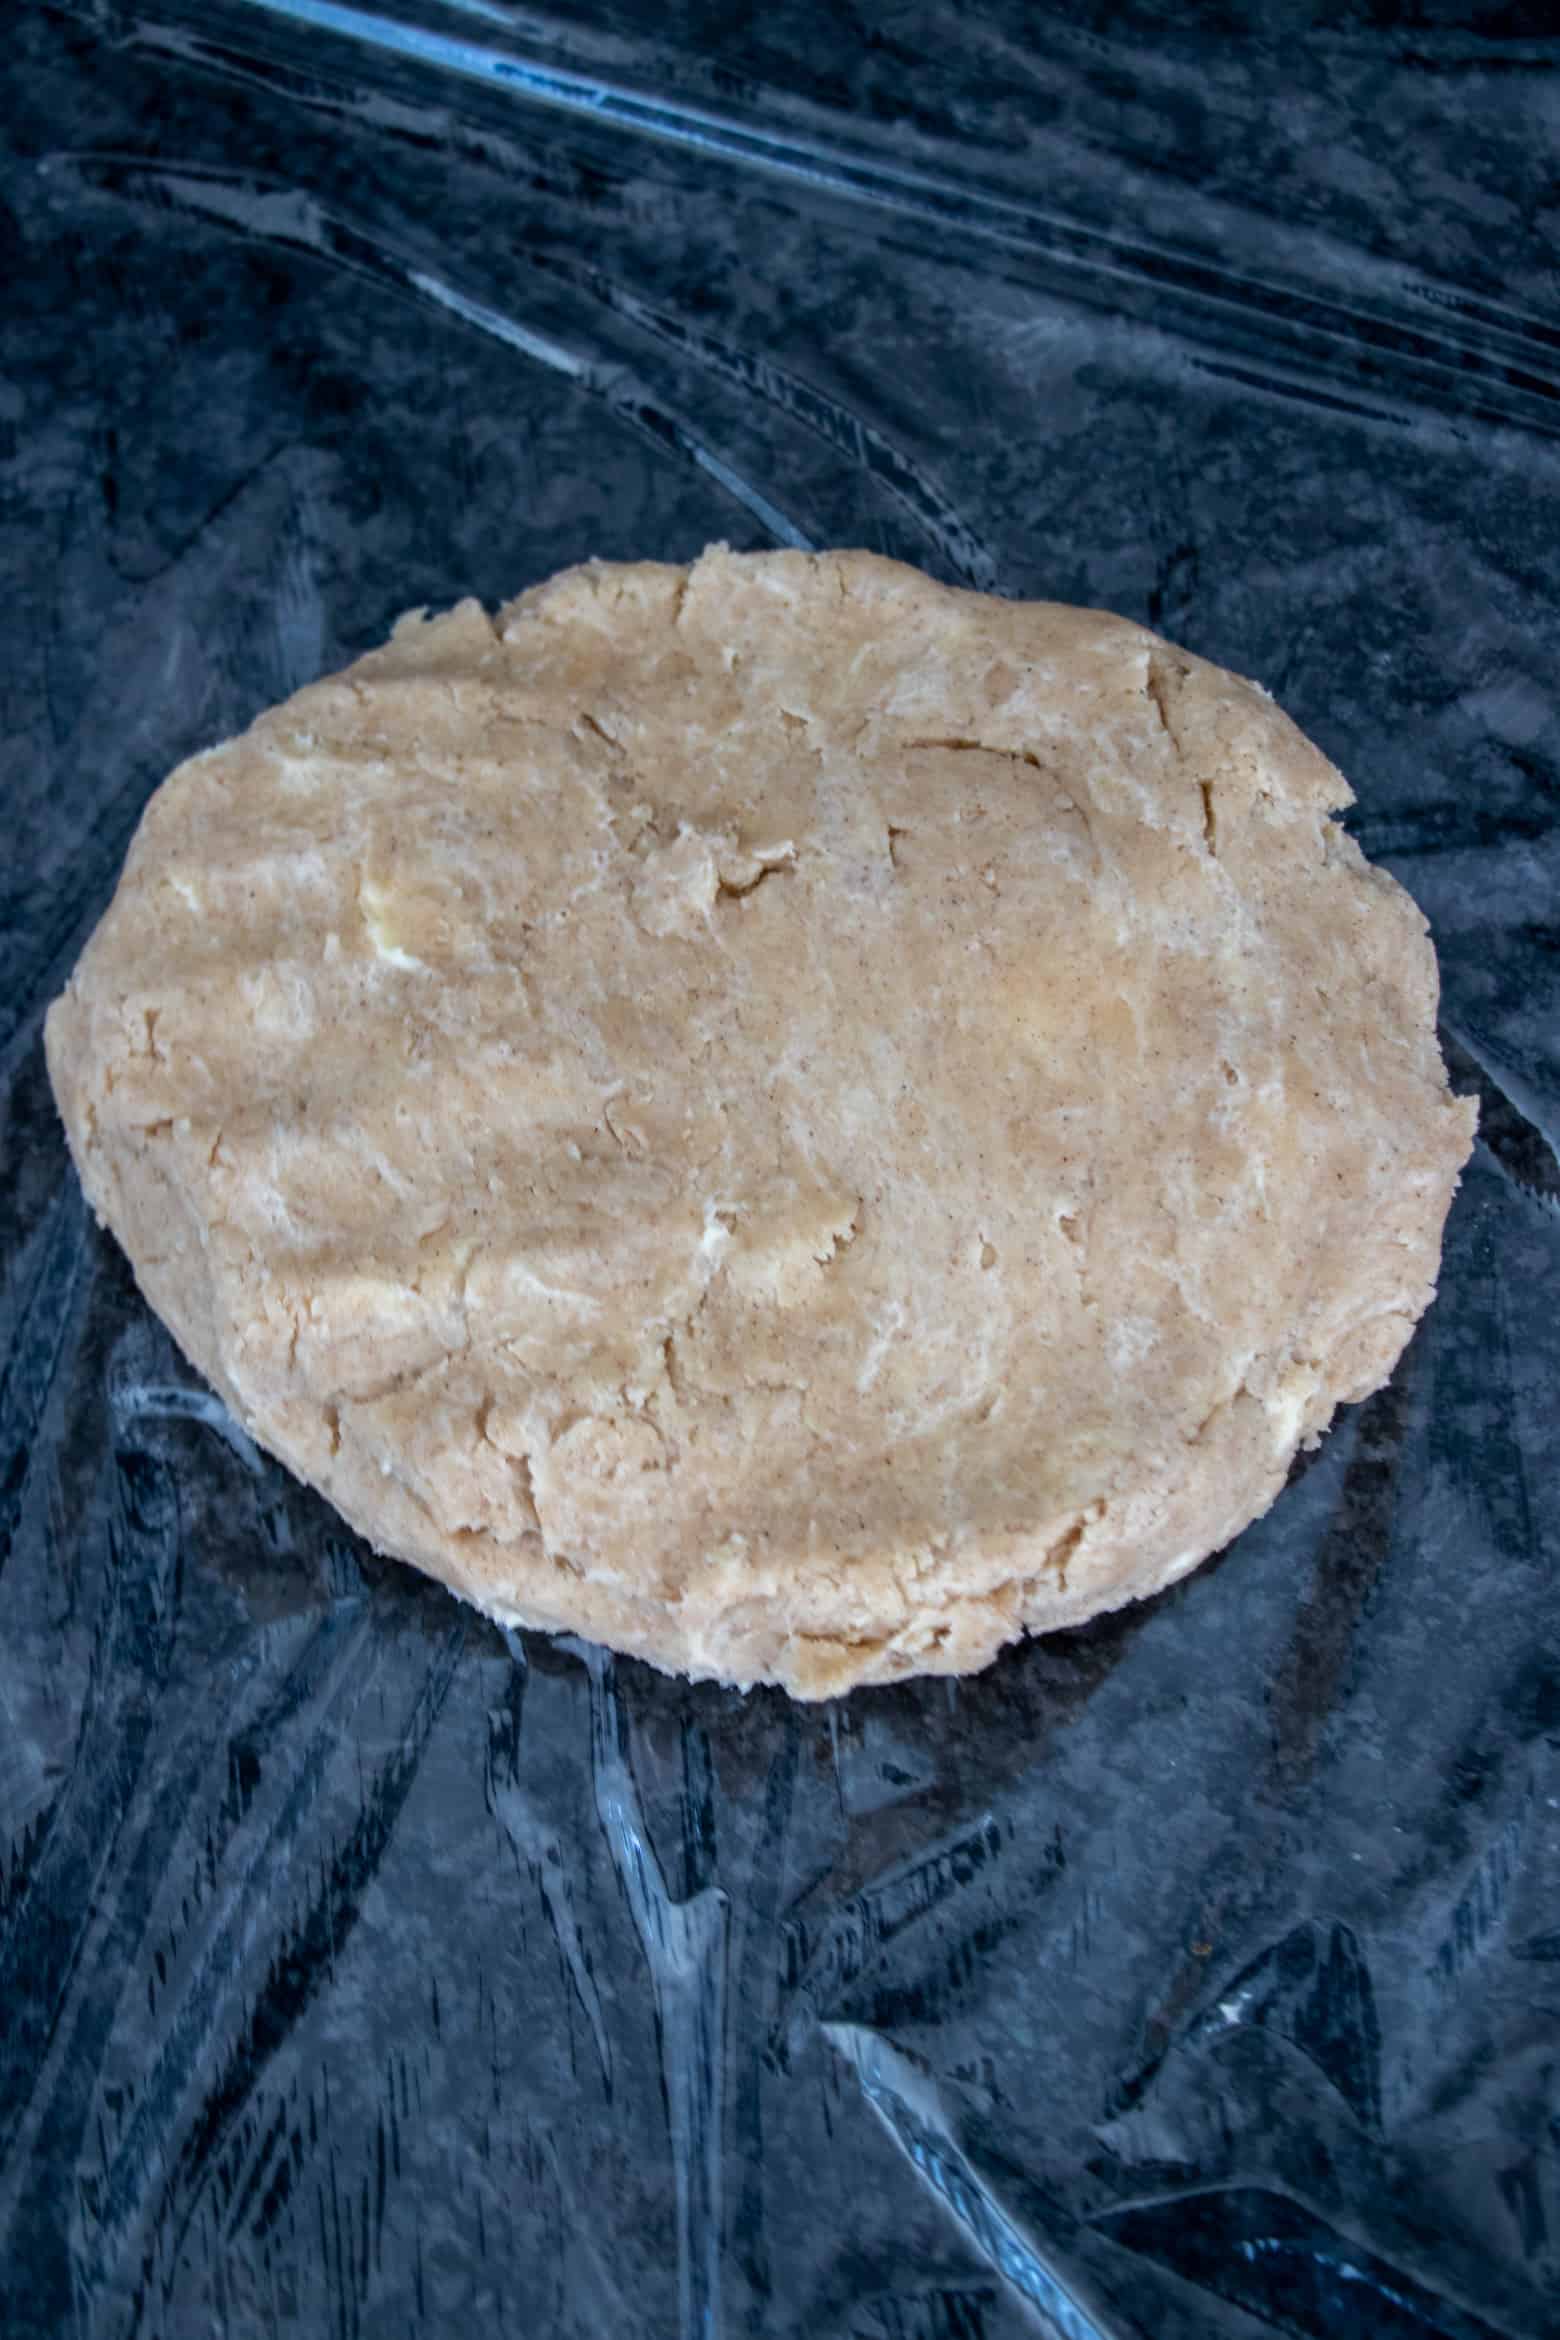 Pie dough shaped in a disc going to chill in the fridge.